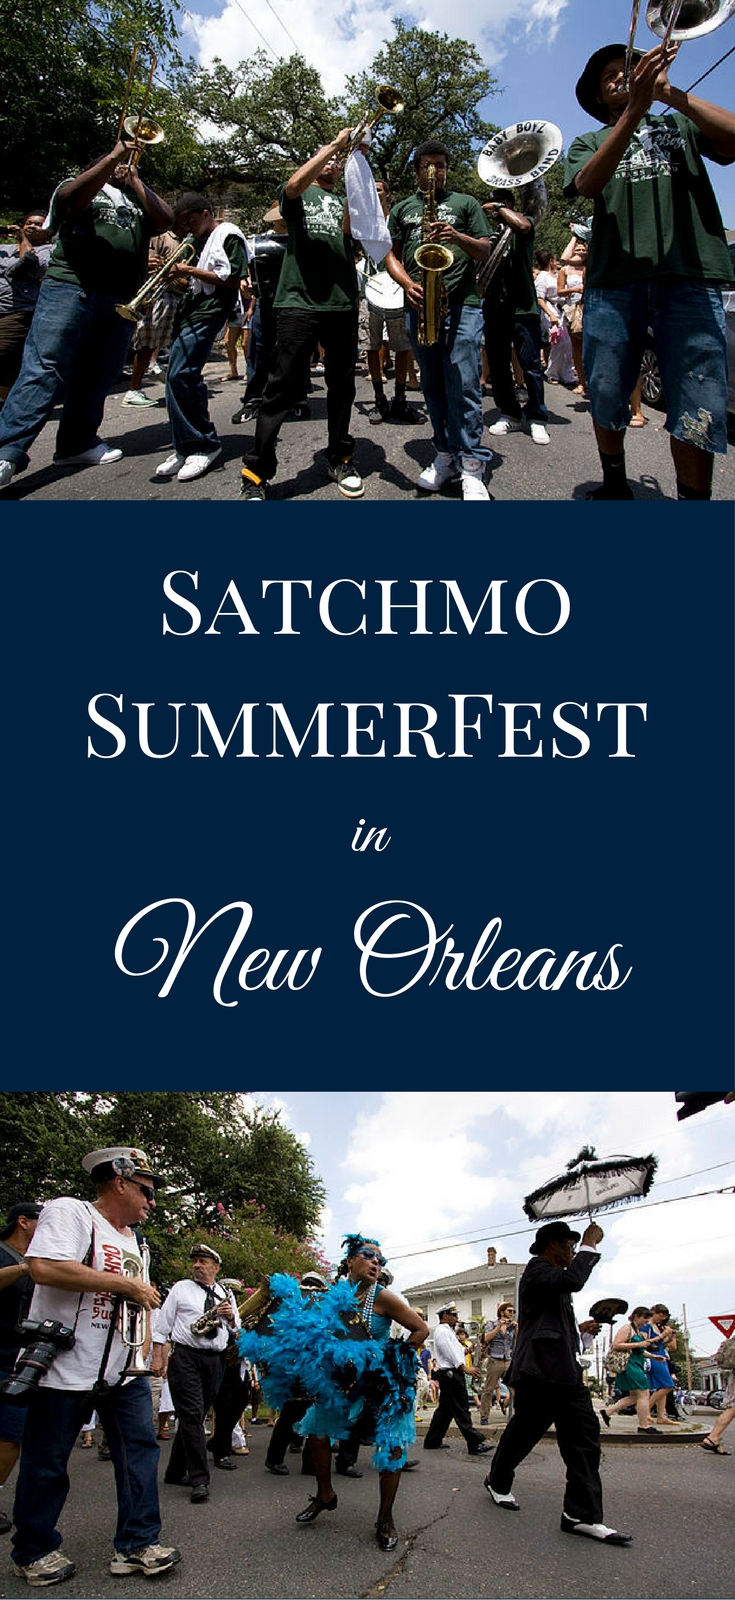 Satchmo SummerFest honors New Orleans' most famous son, Louis Armstrong, with 3 days of music, food, and fun, each August in the French Quarter.